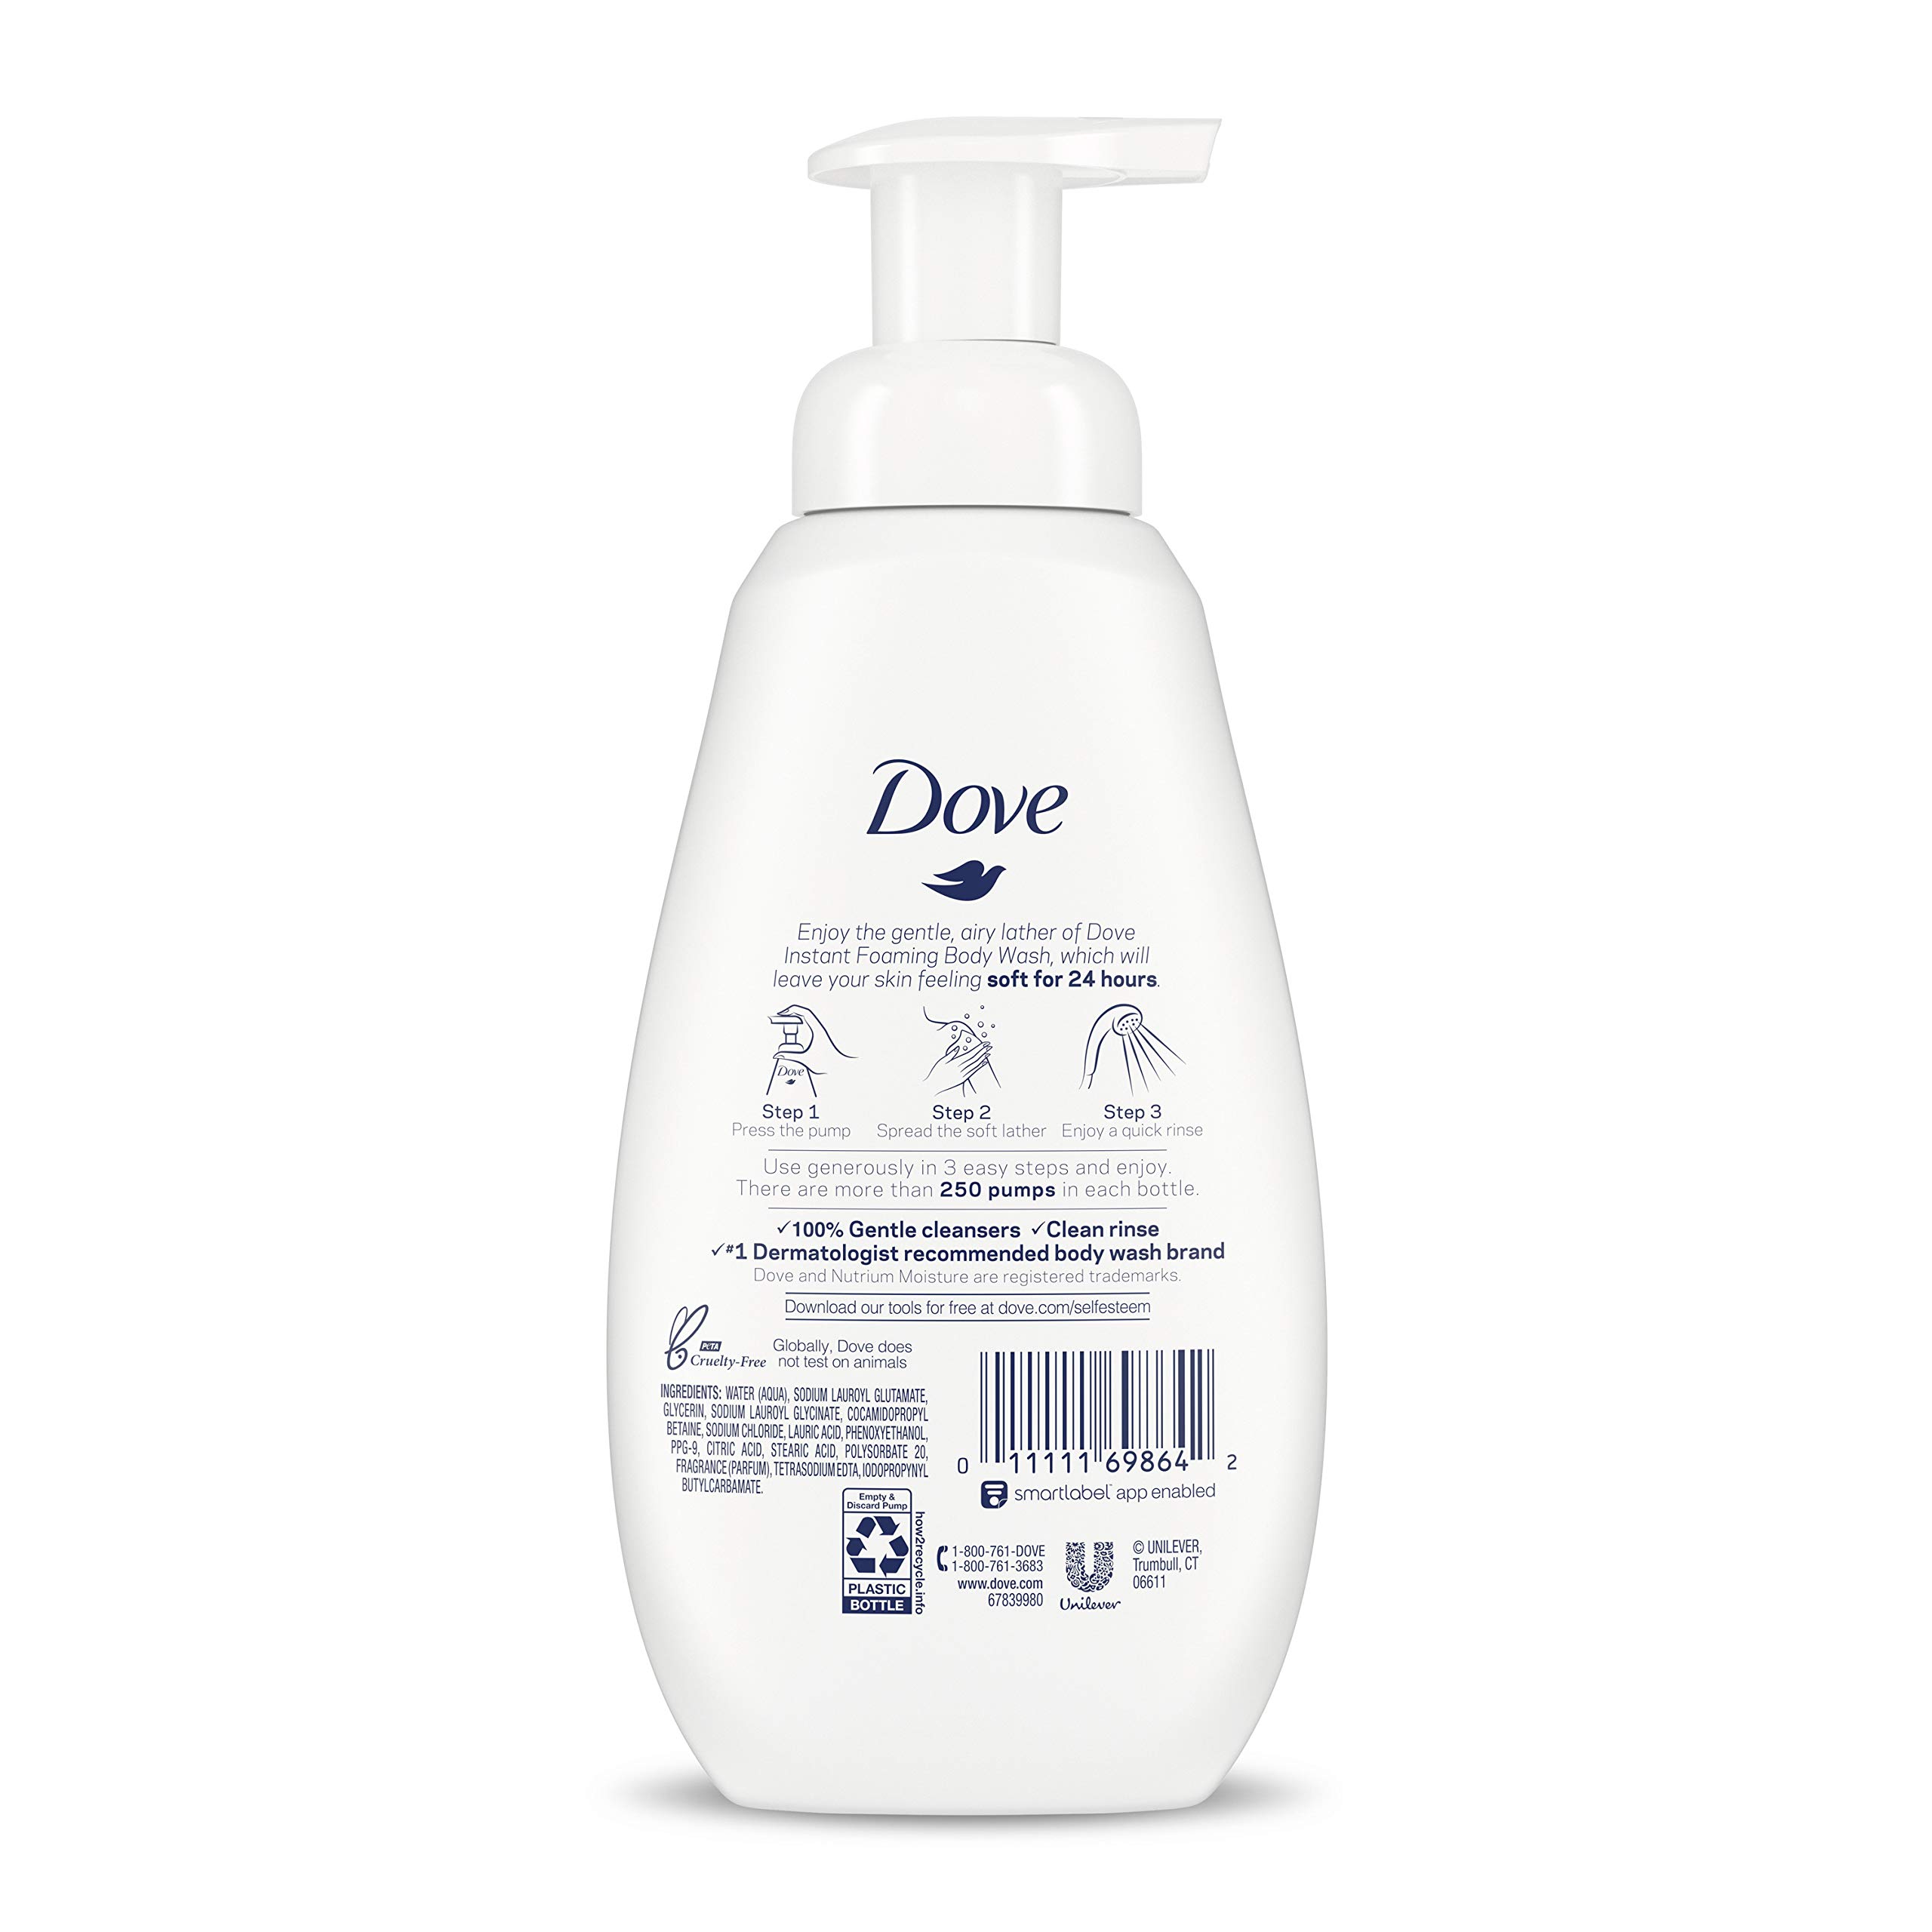 Dove Instant Foaming Body Wash for Softer and Smoother Skin Sensitive Skin Effectively Washes Away Bacteria While Nourishing Your Skin 13.5 oz Pack of 4